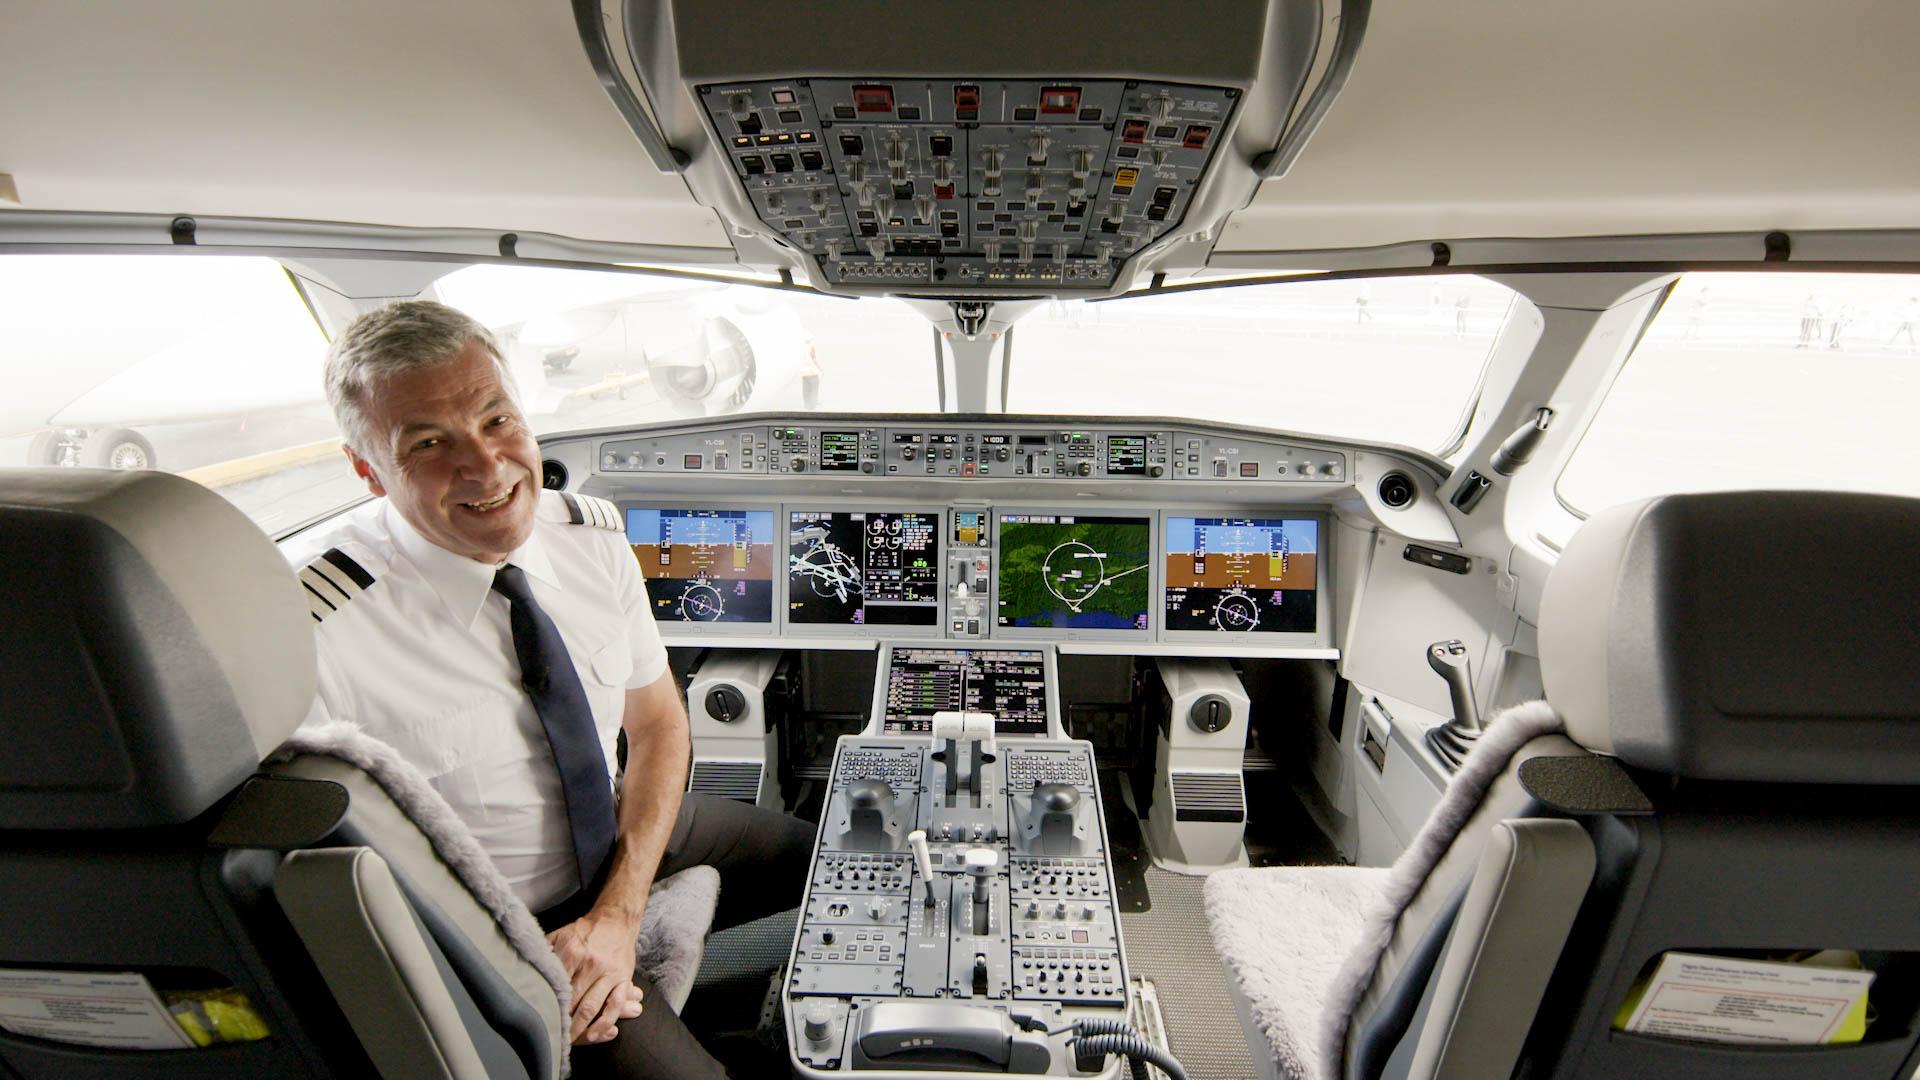 Take A Look Inside The Cockpit Of An Airbus A220 300